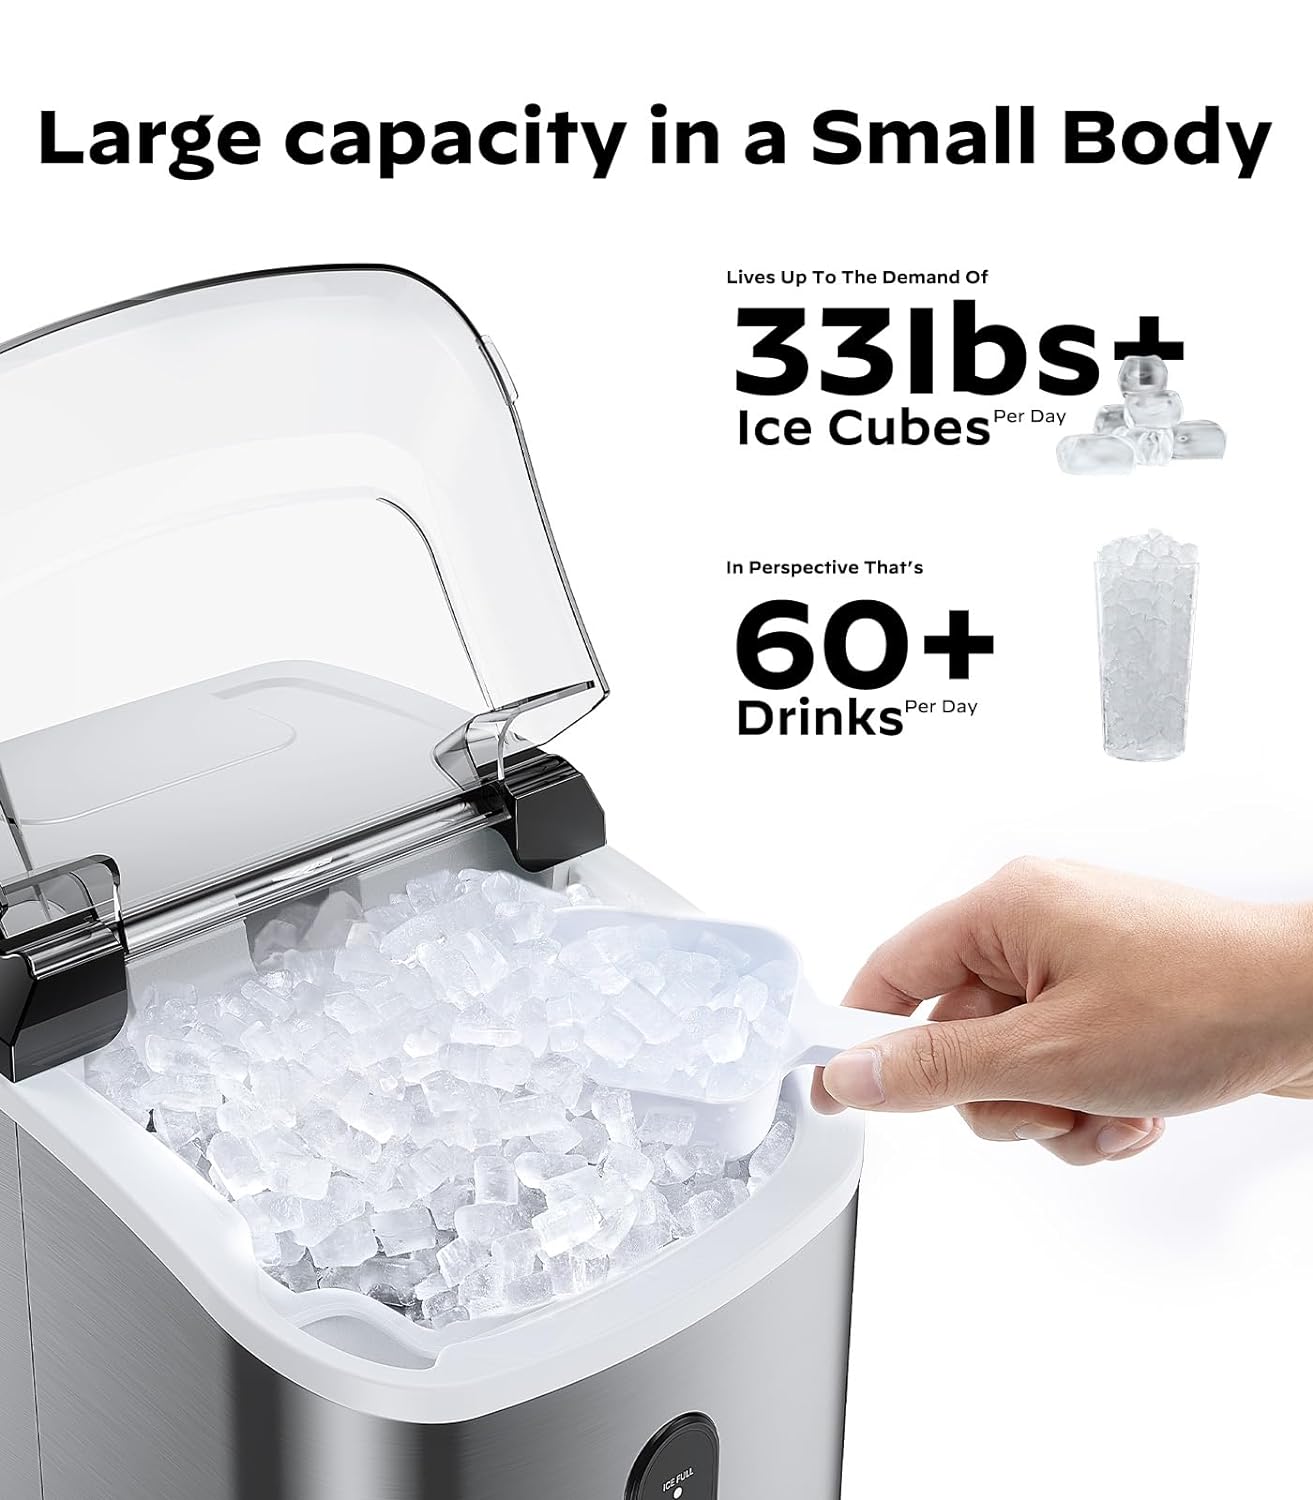 Nugget Countertop Ice Maker Silonn Chewable Pellet Ice Machine with Self-Cleaning Function